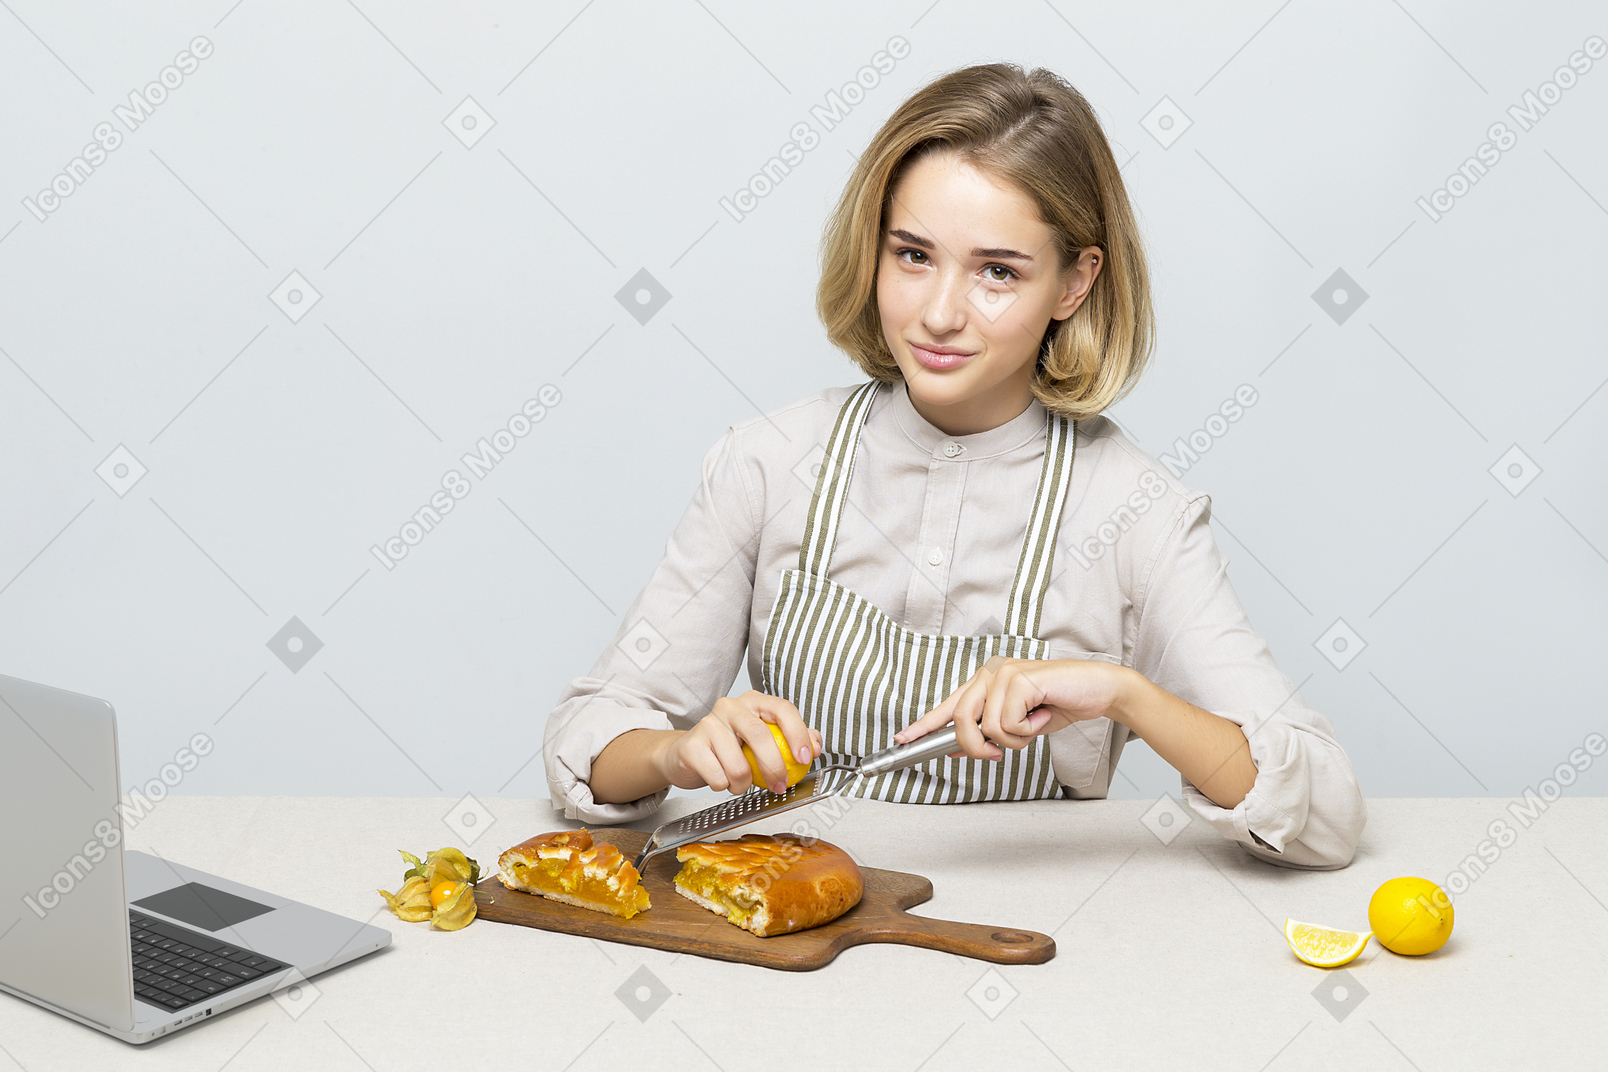 Attractive girl cooking a lemon pie while watching online video